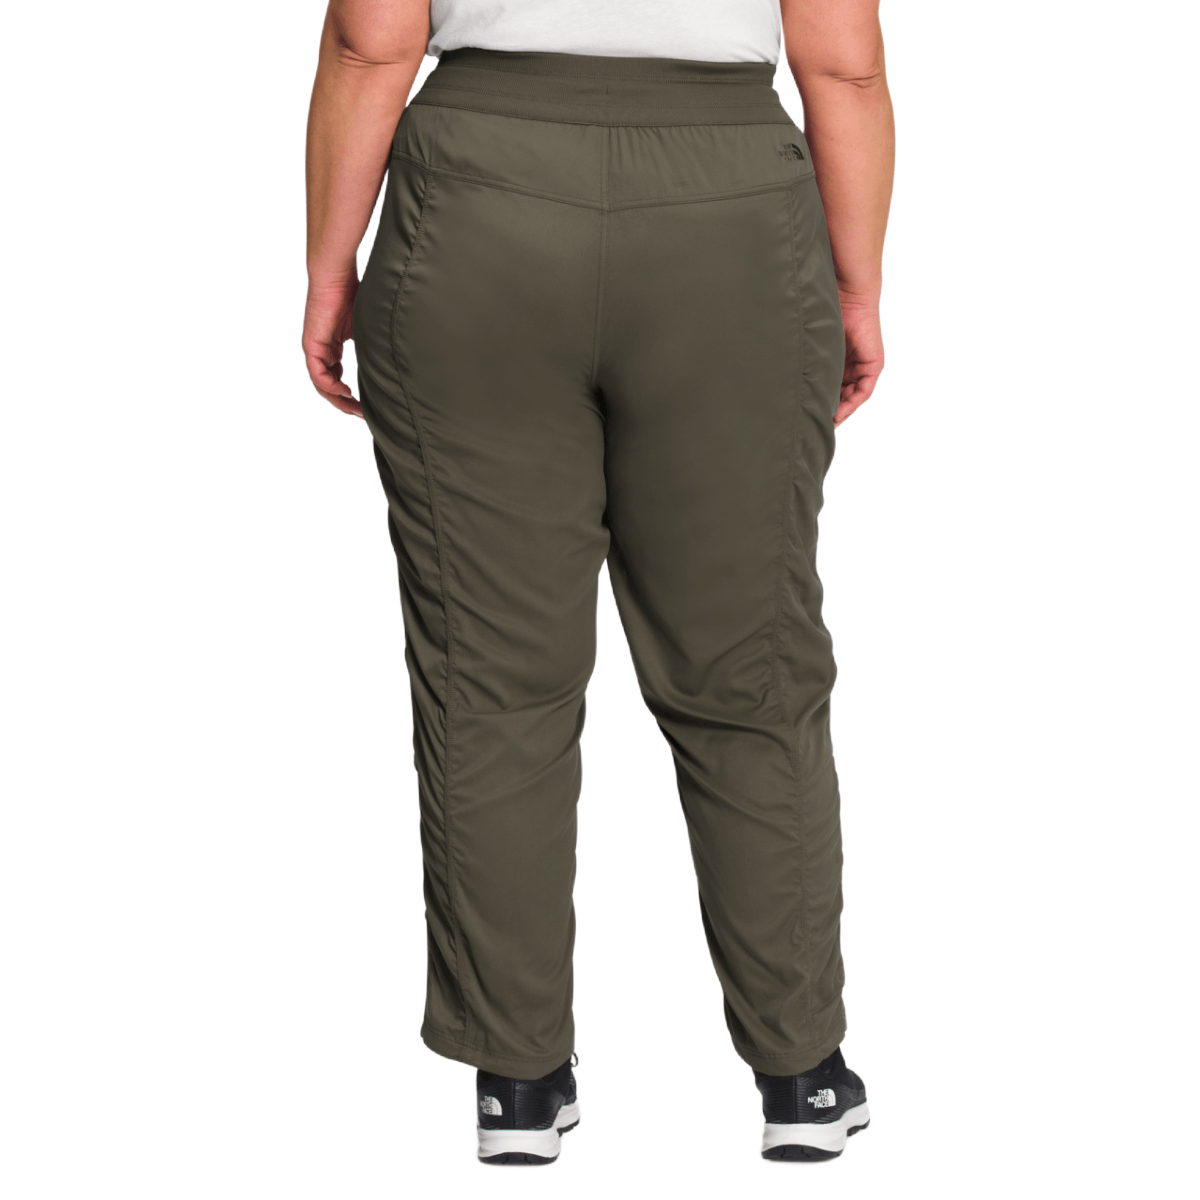 THE NORTH FACE Women's Plus Aphrodite 2.0 Pant, New Taupe Green